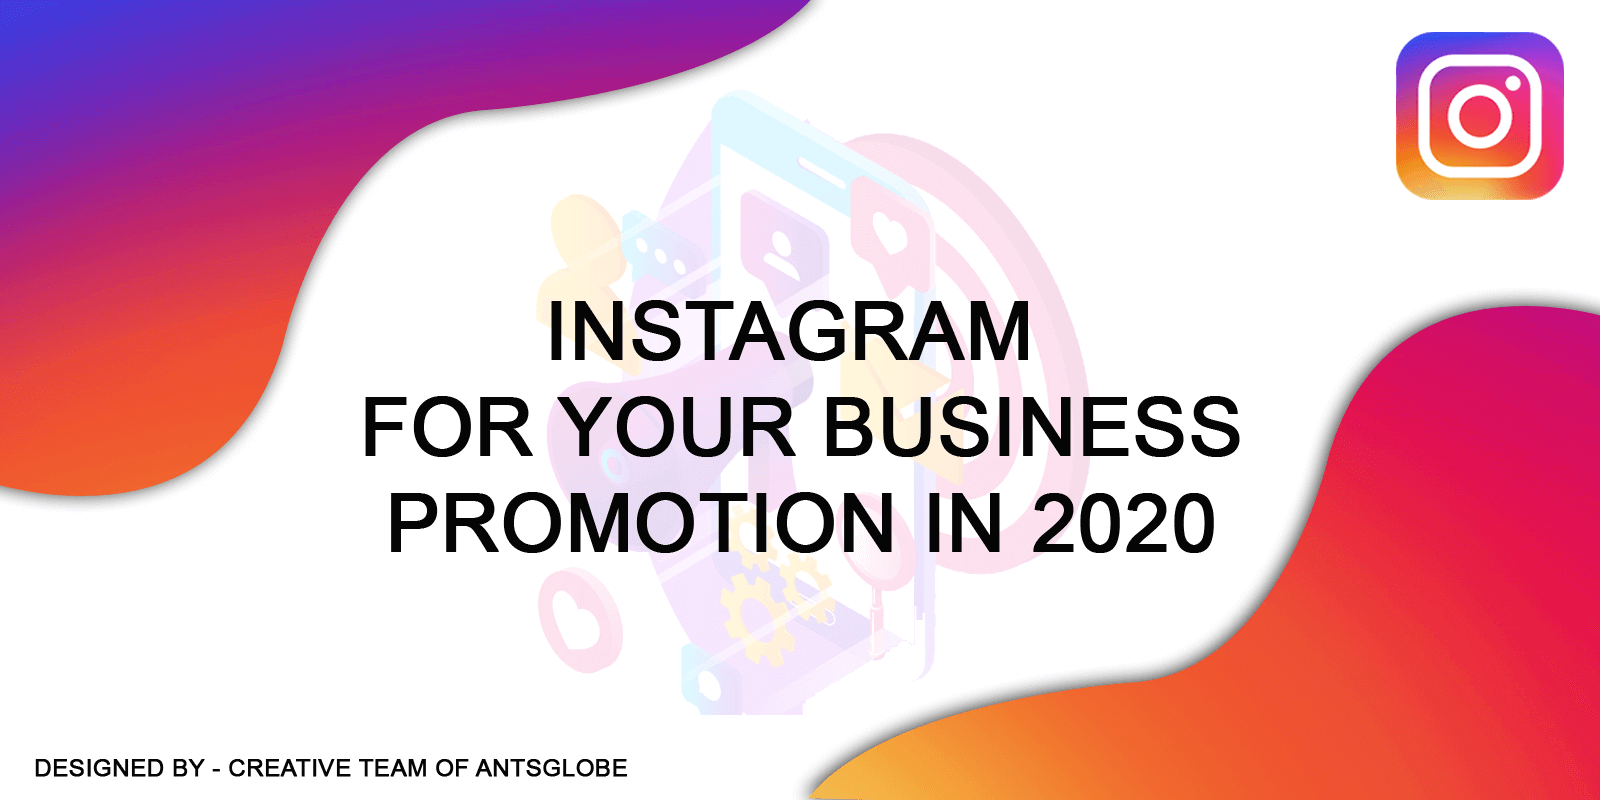 how-instagram-can-be-used-for-promoting-our-business-in-2020